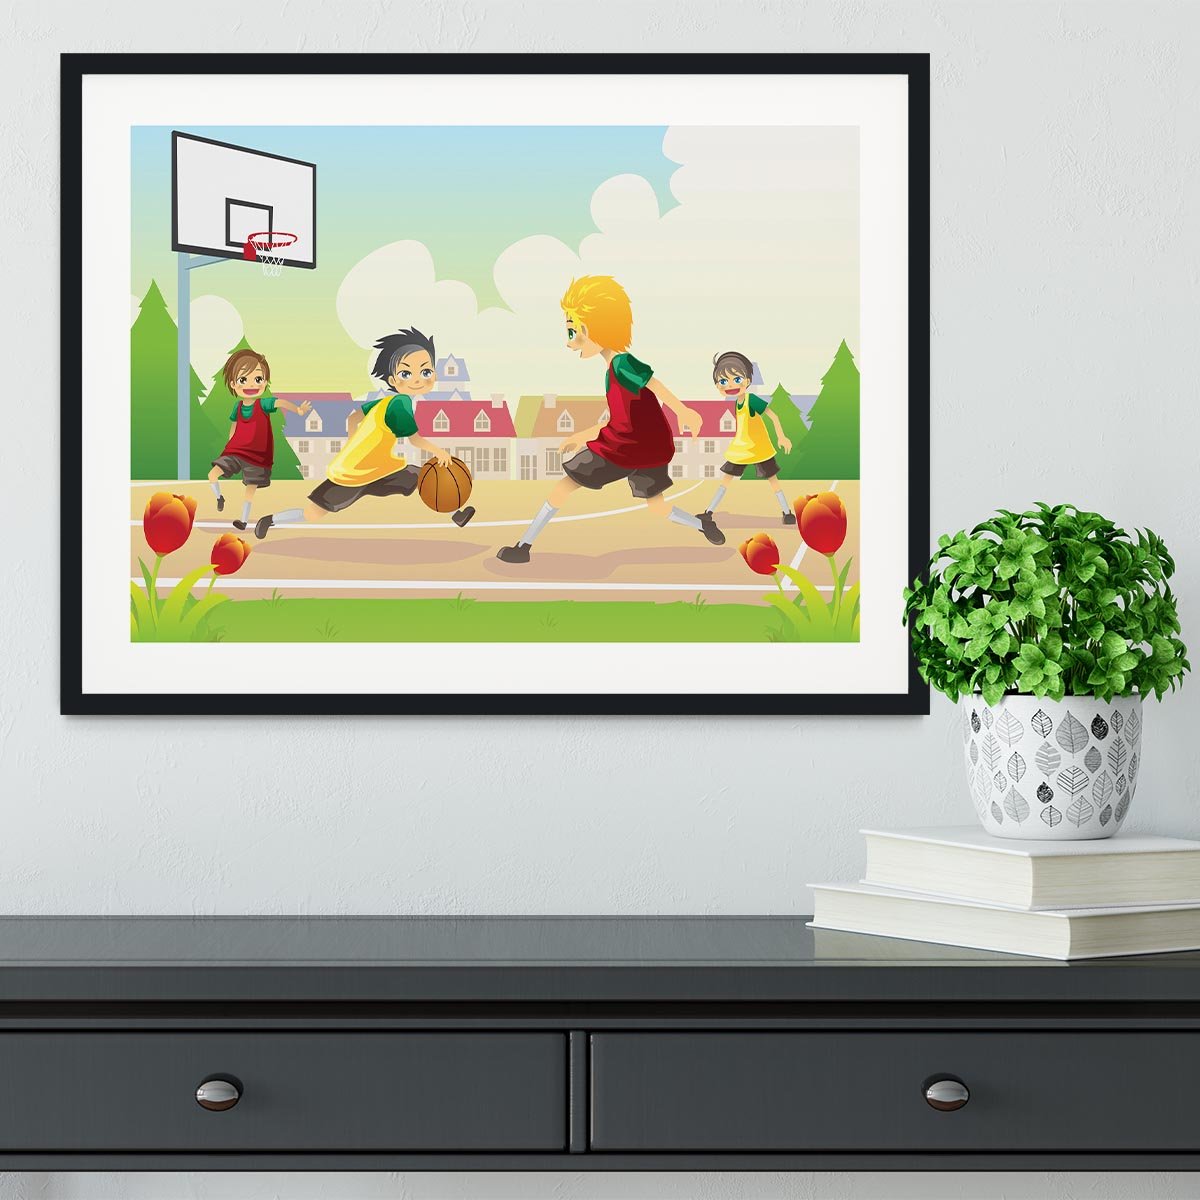 Kids playing basketball in the suburban area Framed Print - Canvas Art Rocks - 1